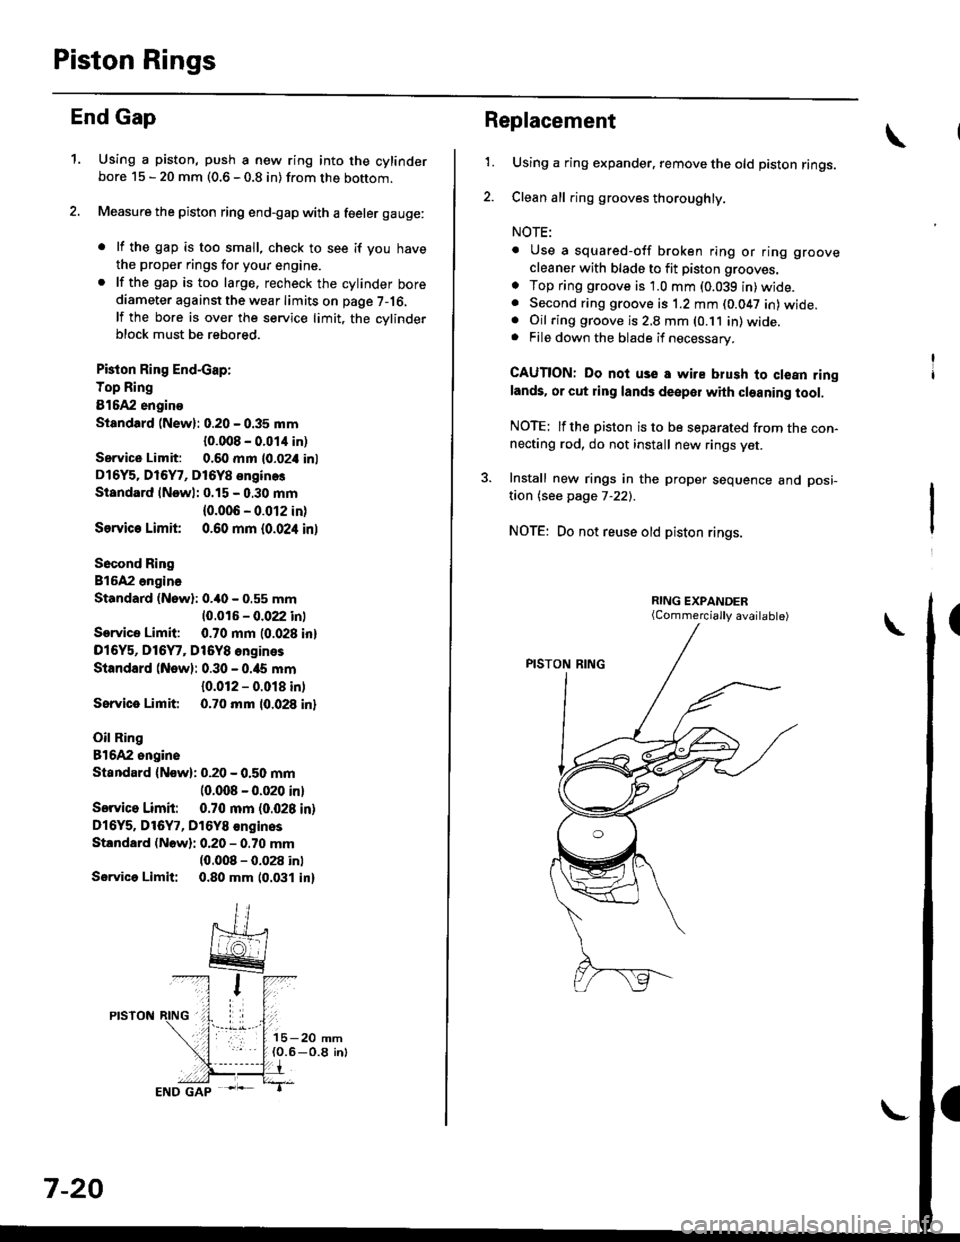 HONDA CIVIC 1996 6.G Service Manual Piston Rings
End Gap
1.Using a piston, push a new ring into the cylinderbore 15 - 20 mm (0.6 - 0.8 in) from the bottom.
Measure the piston ring end-gap with a feeler gauge:
. lf the gap is too small, 